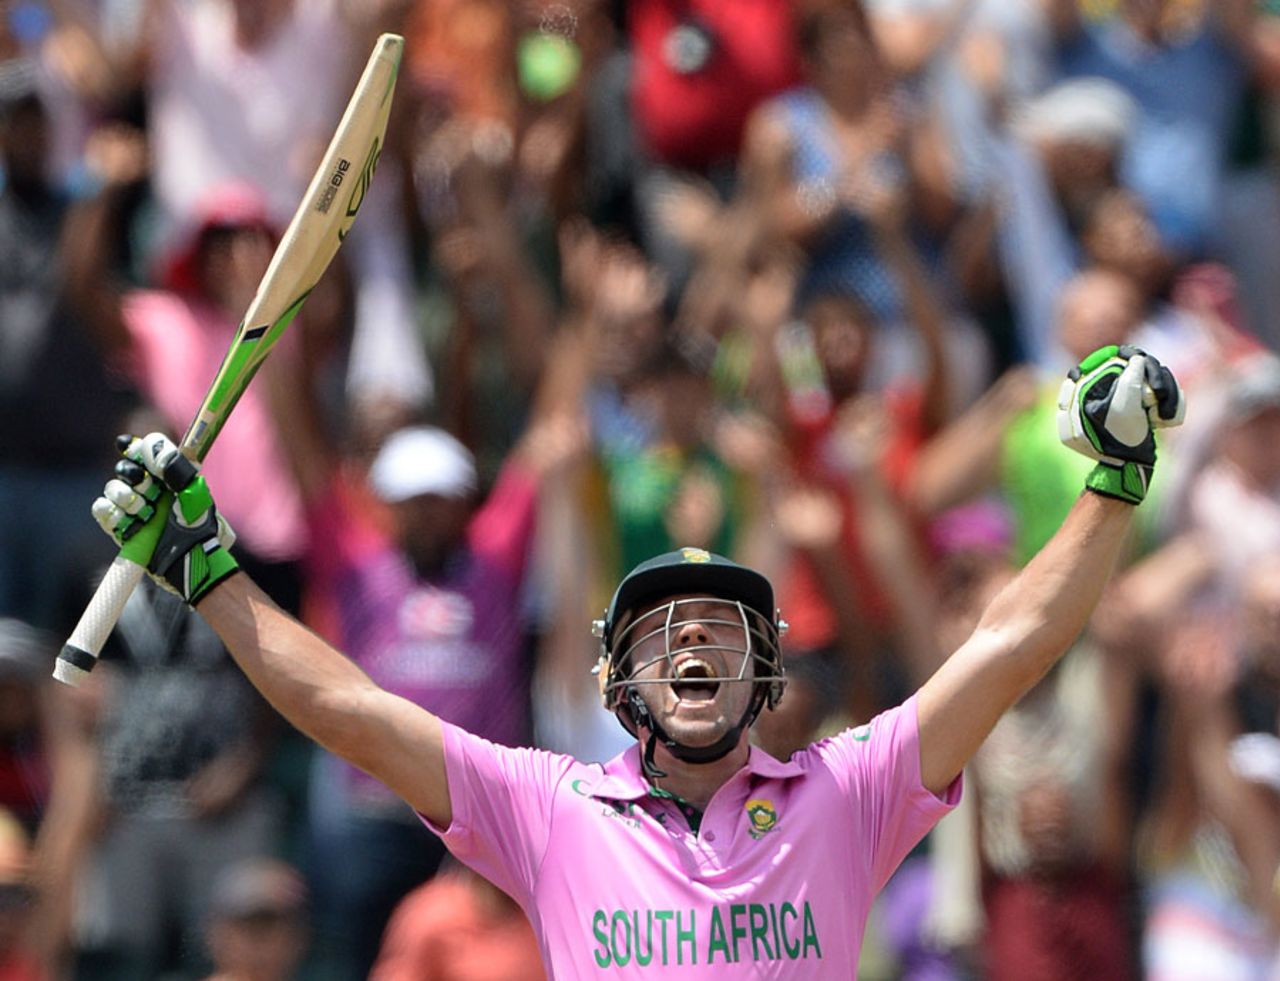 AB de Villiers raises his arms after a stunning 31-ball hundred, South Africa v West Indies, 2nd ODI, Johannesburg, January 18, 2015